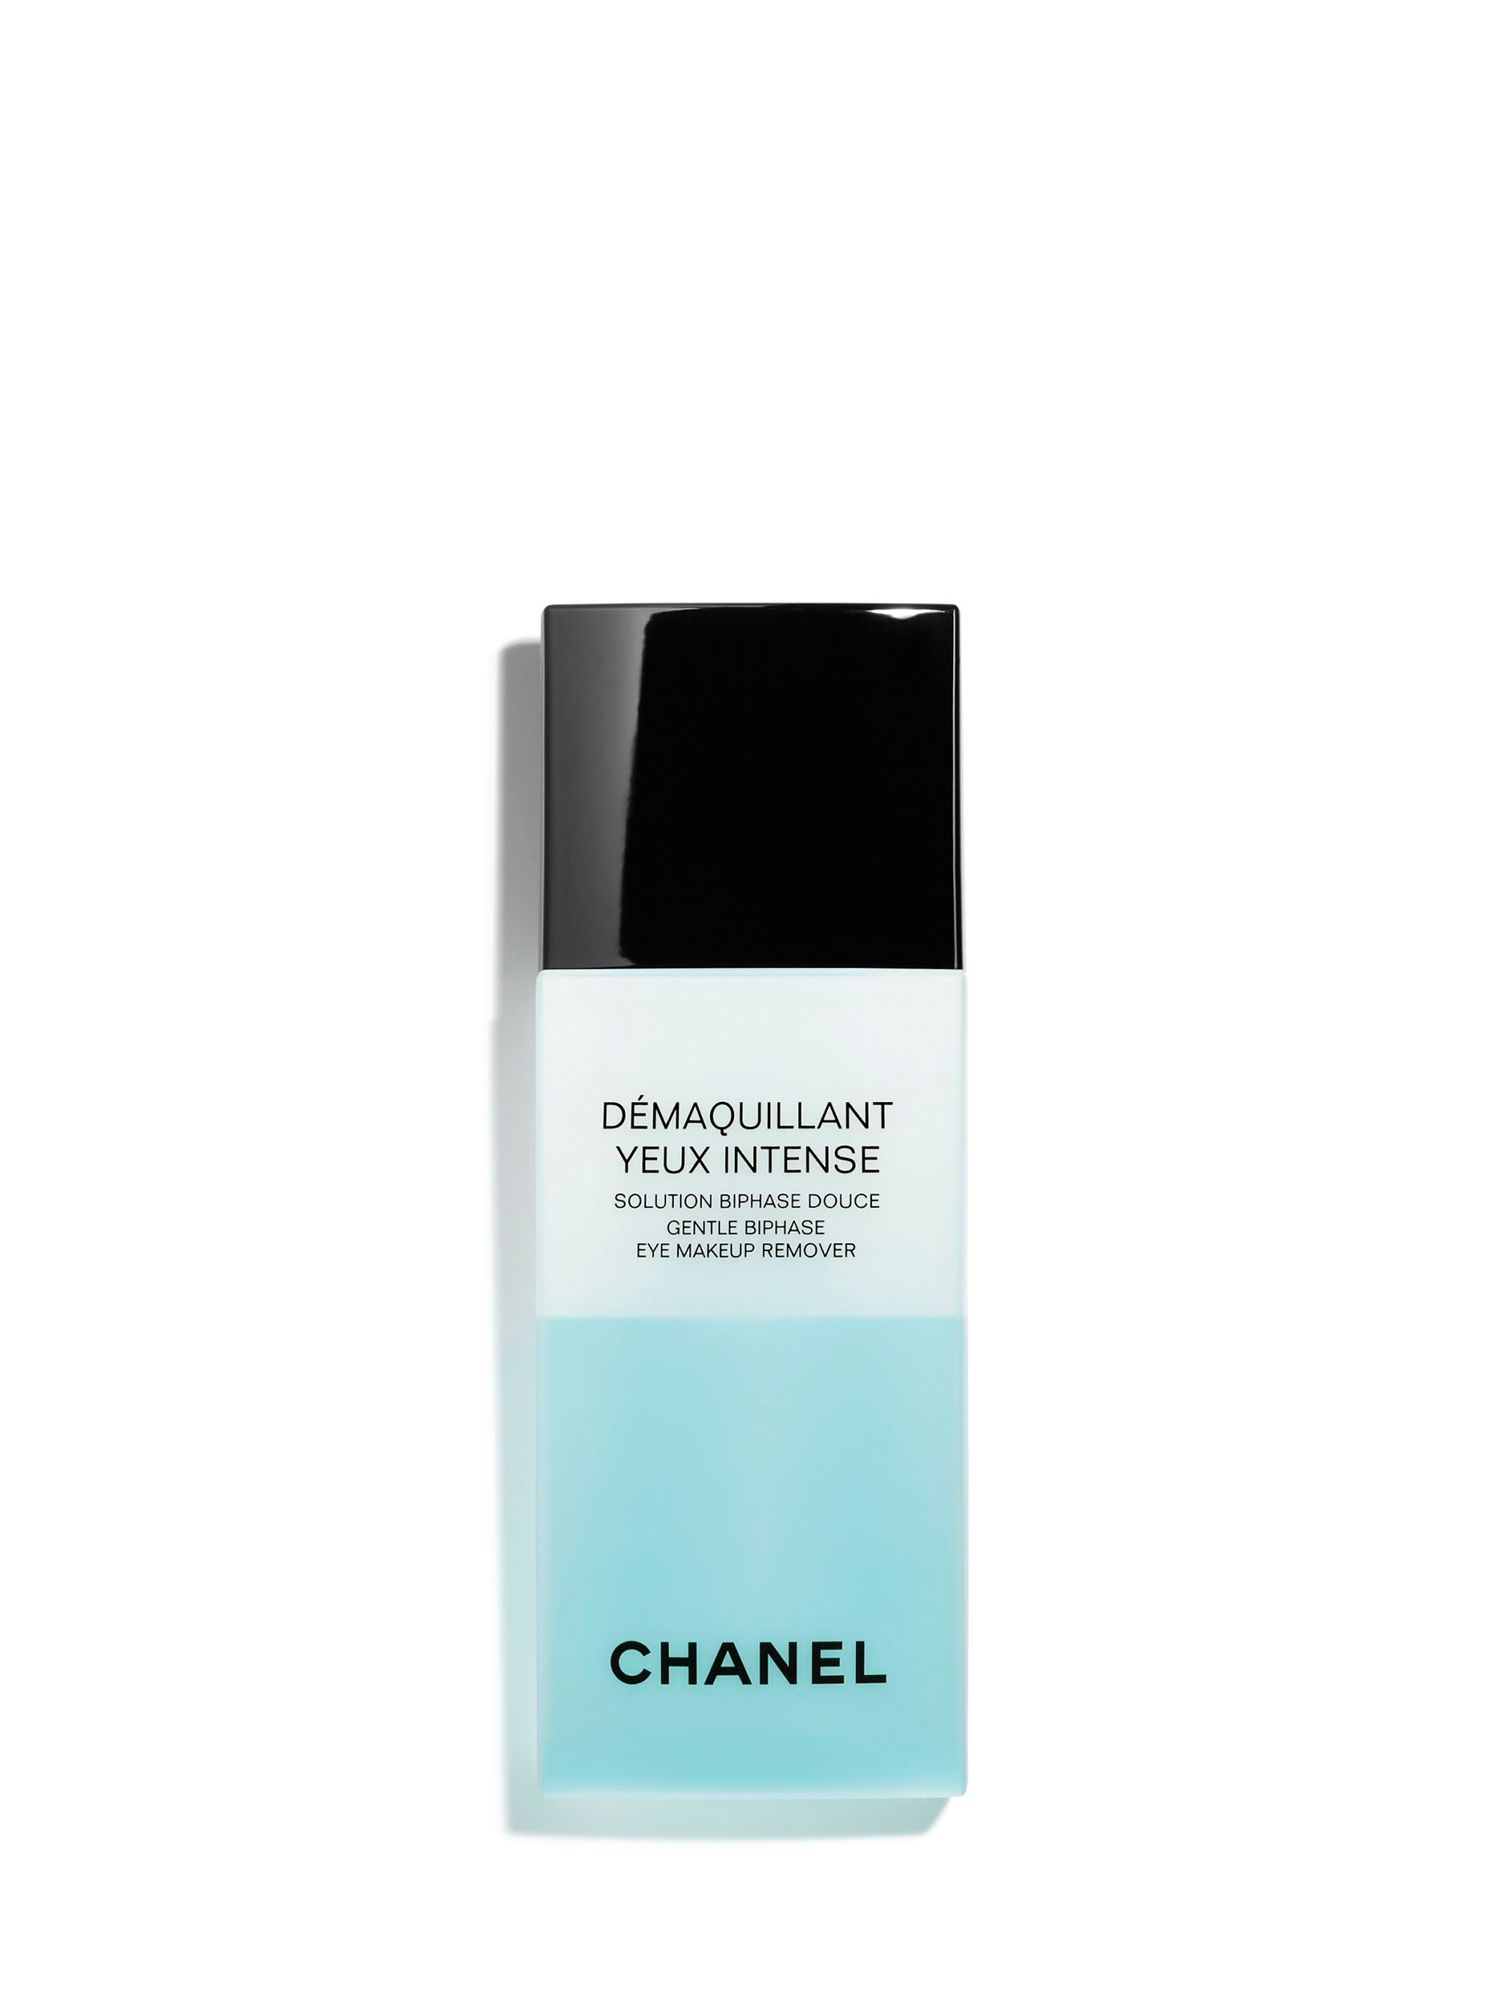 CHANEL	Démaquillant Yeux Intense Gentle Biphase Eye Makeup Remover, 100ml 1